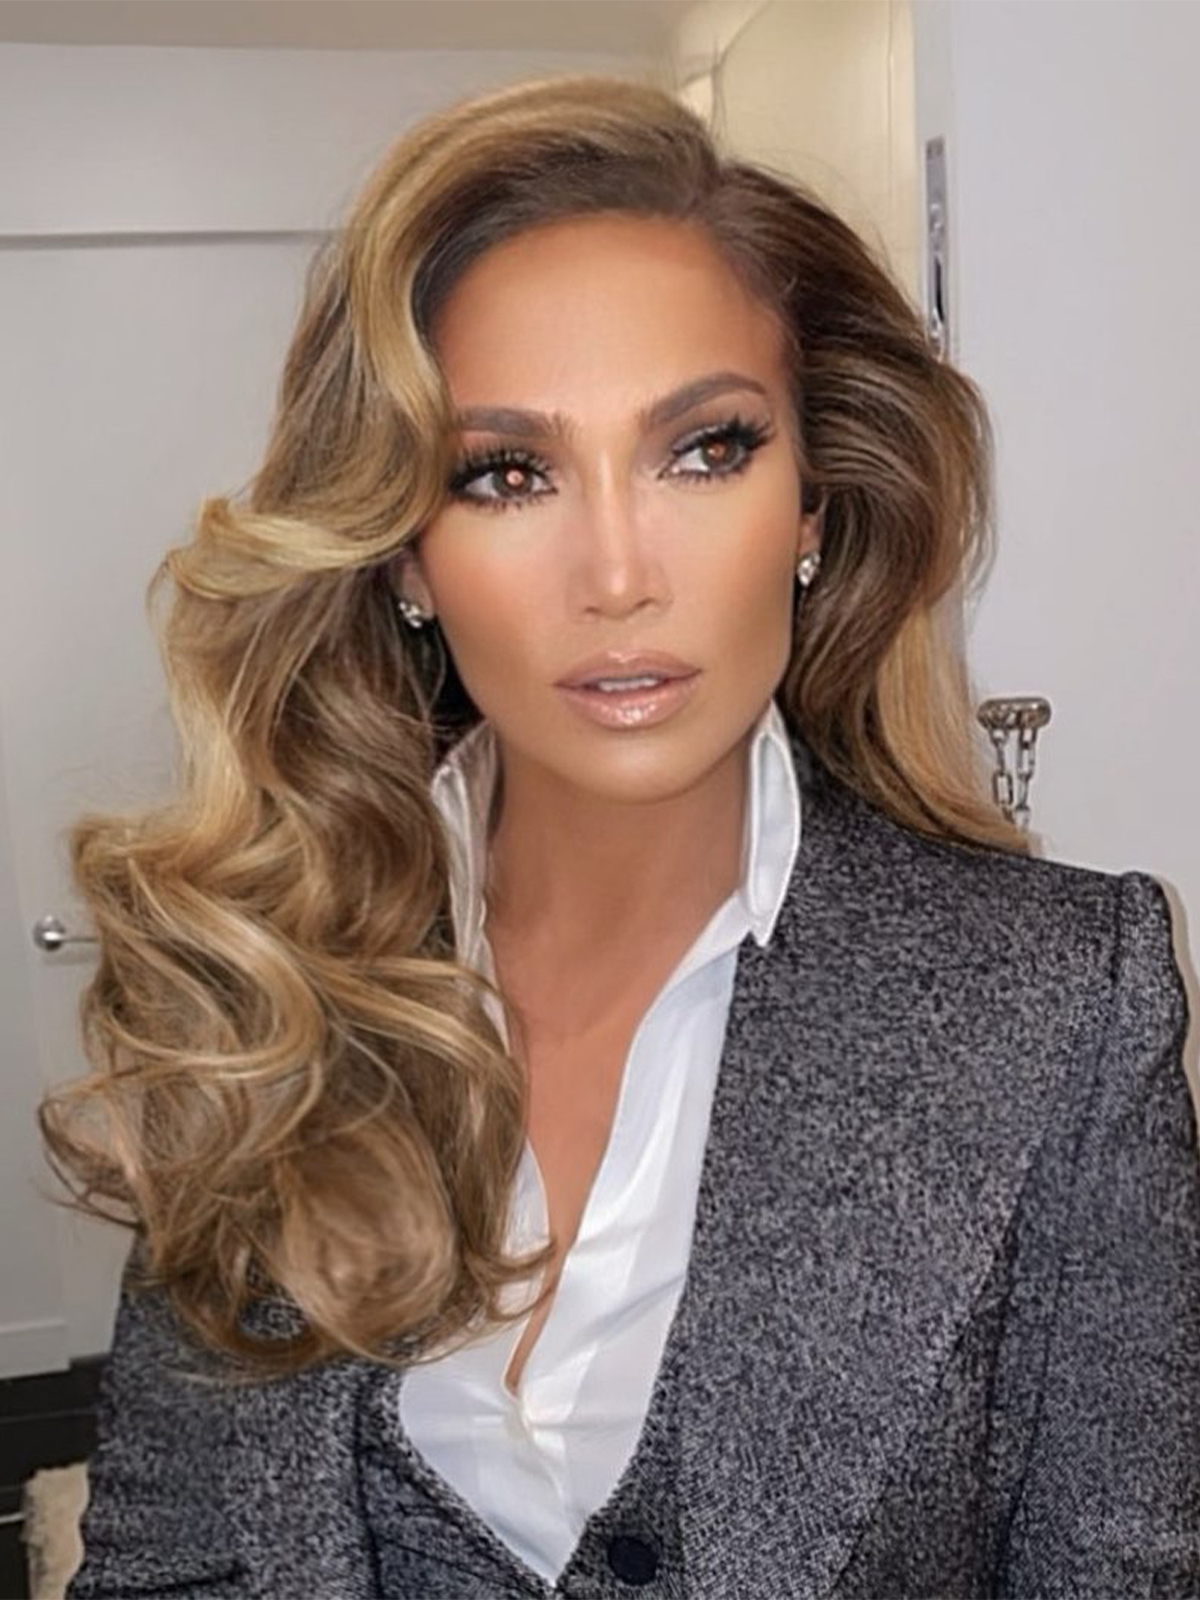 Haircuts for Women in Their 50s: J. Lo